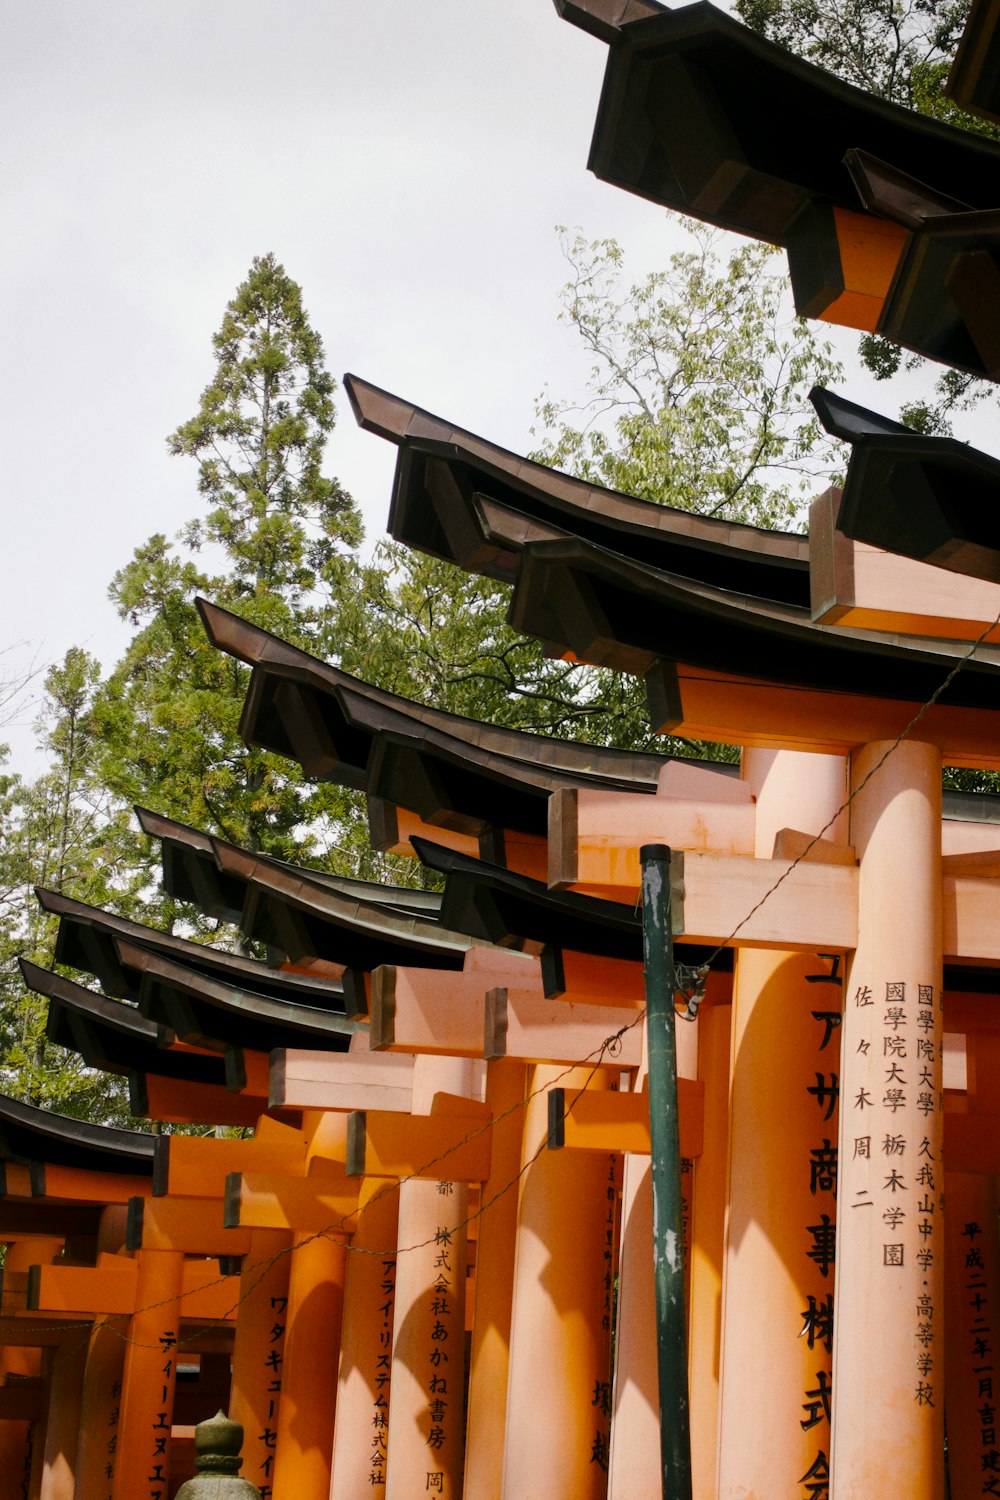 a row of orange pillars with asian writing on them